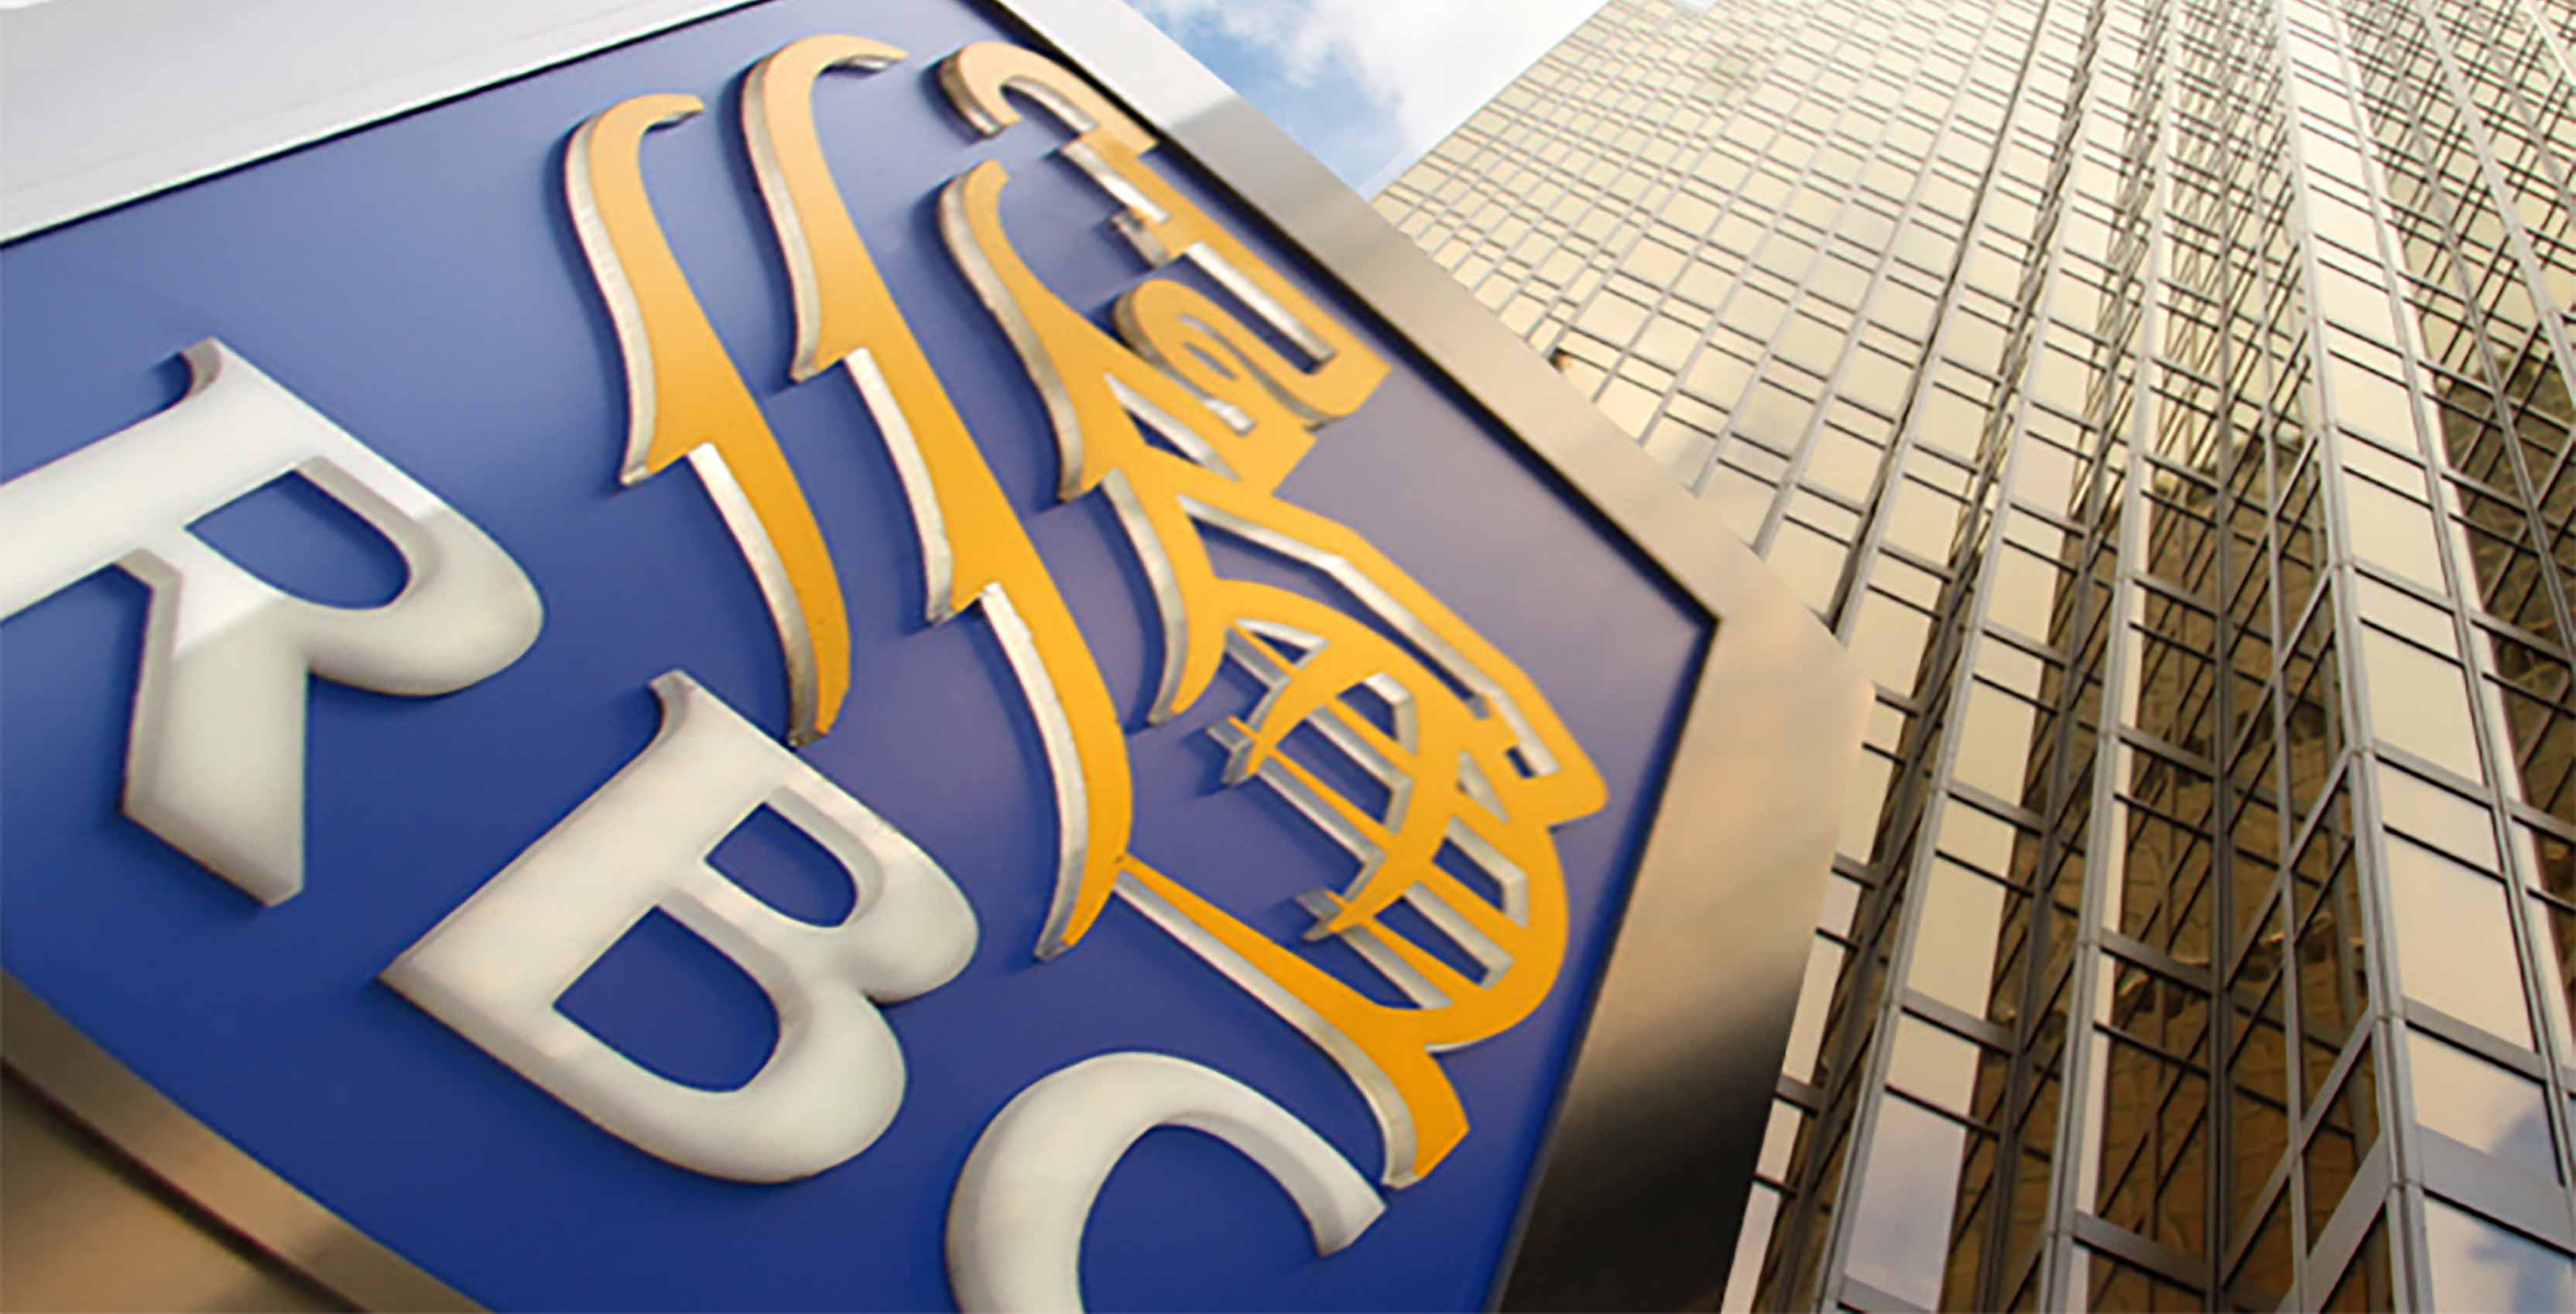 RBC logo in front of office building - RBC e-transfer